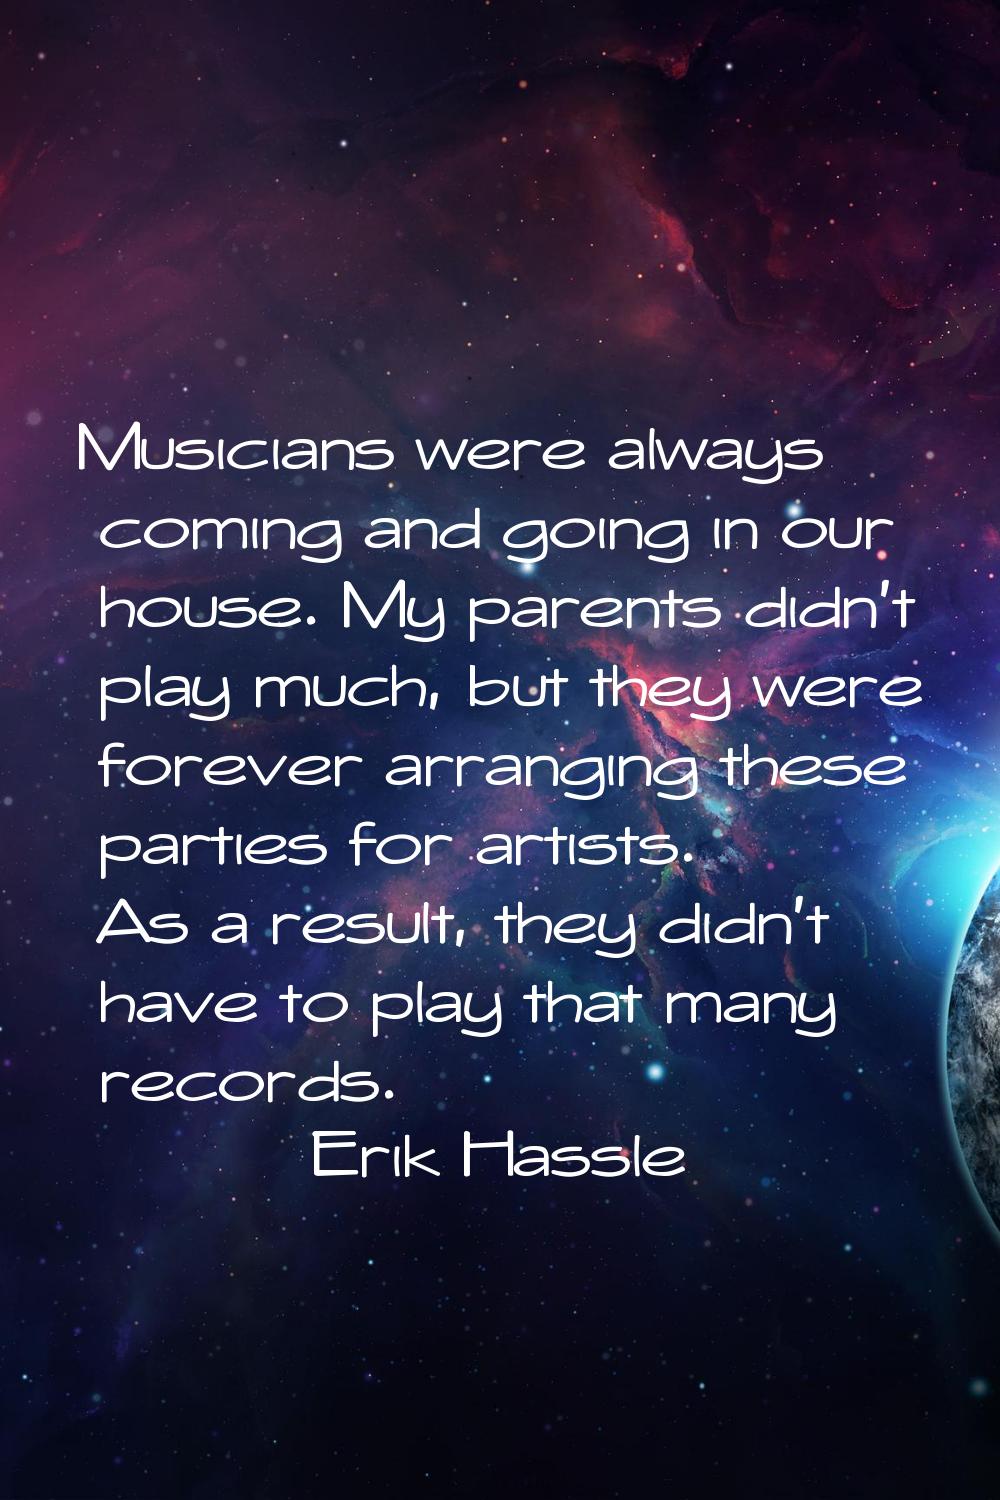 Musicians were always coming and going in our house. My parents didn't play much, but they were for